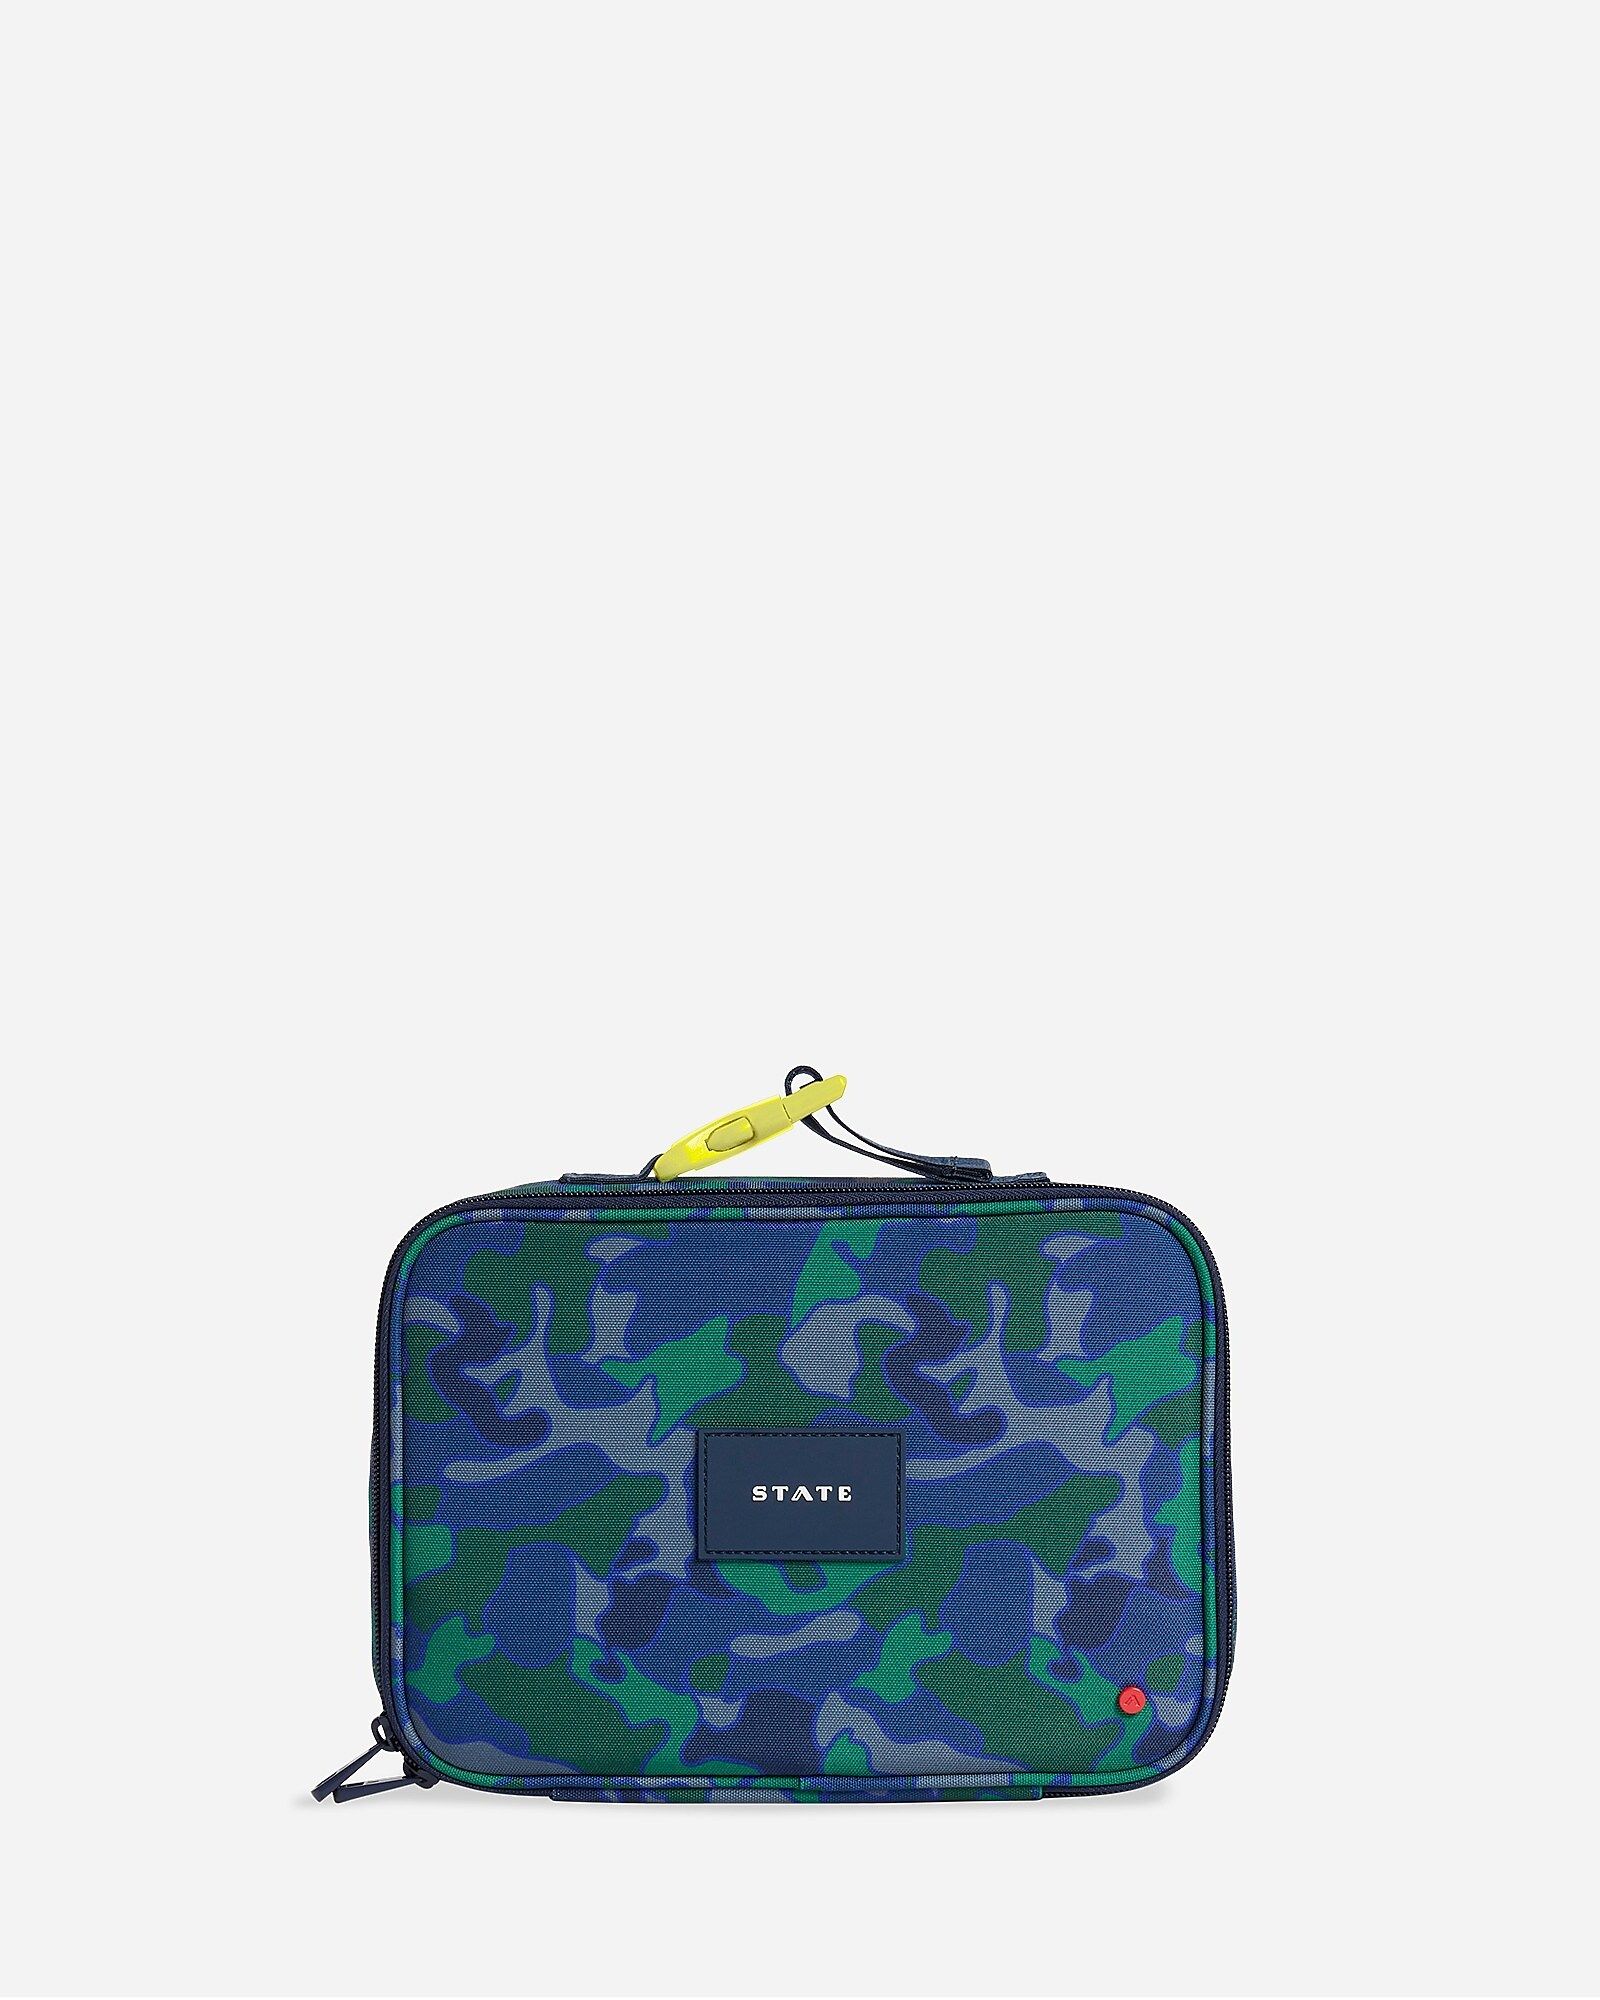 STATE Bags Rodgers lunch box | J.Crew US